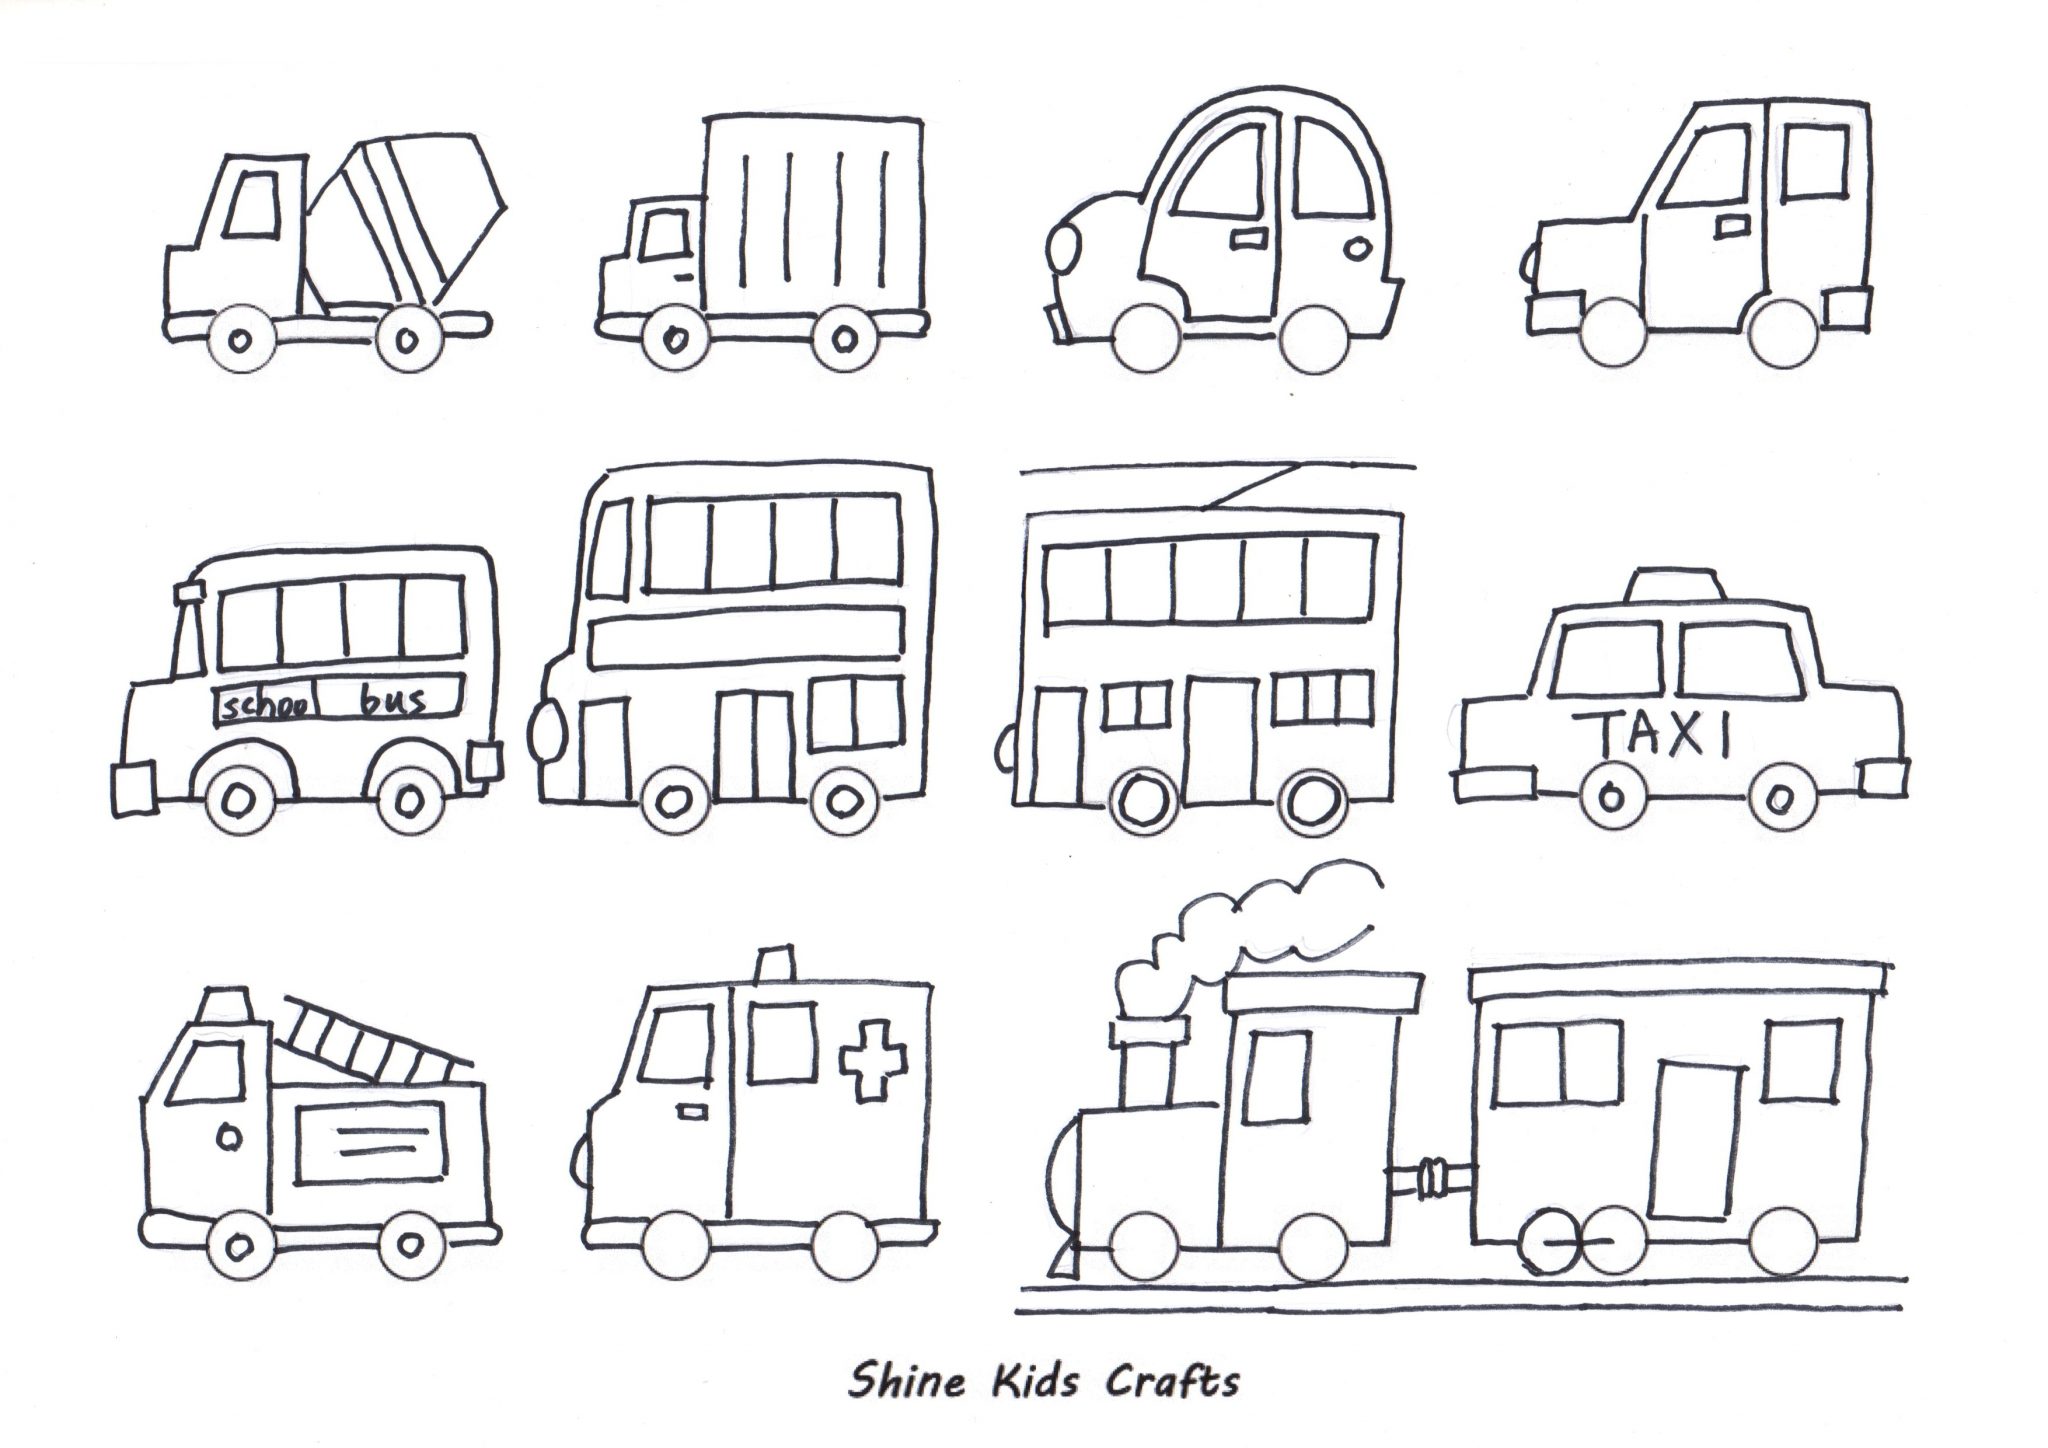 Free Printable Simple Draw Vehicles / Cars Coloring for kids Shine